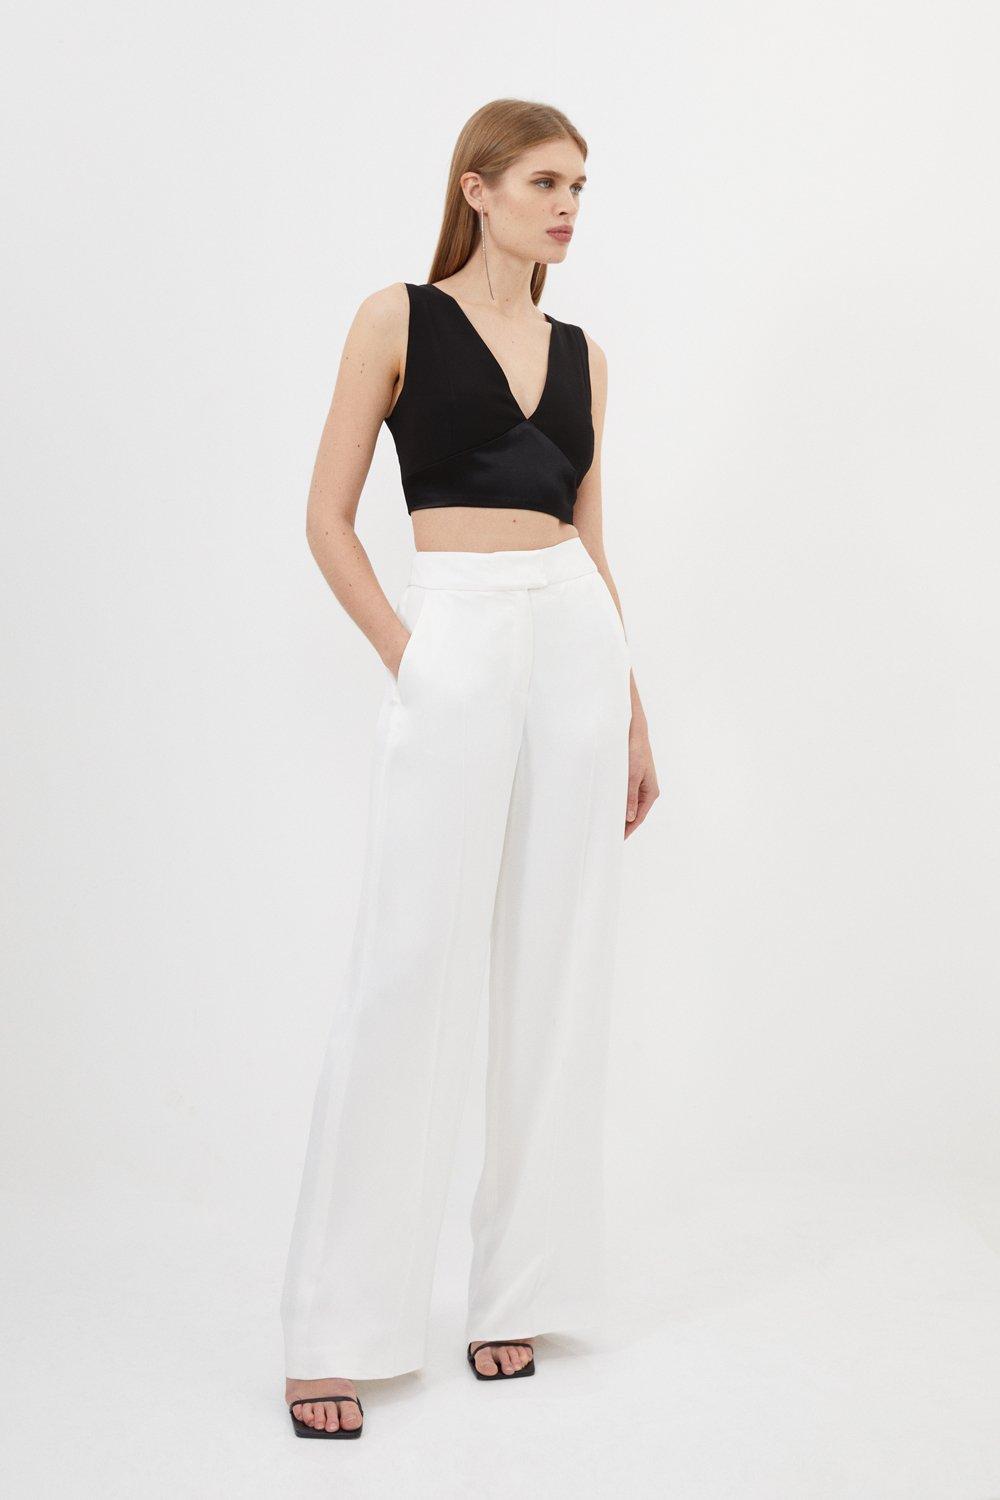 White Wide Leg Pants Outfits (116 ideas & outfits)